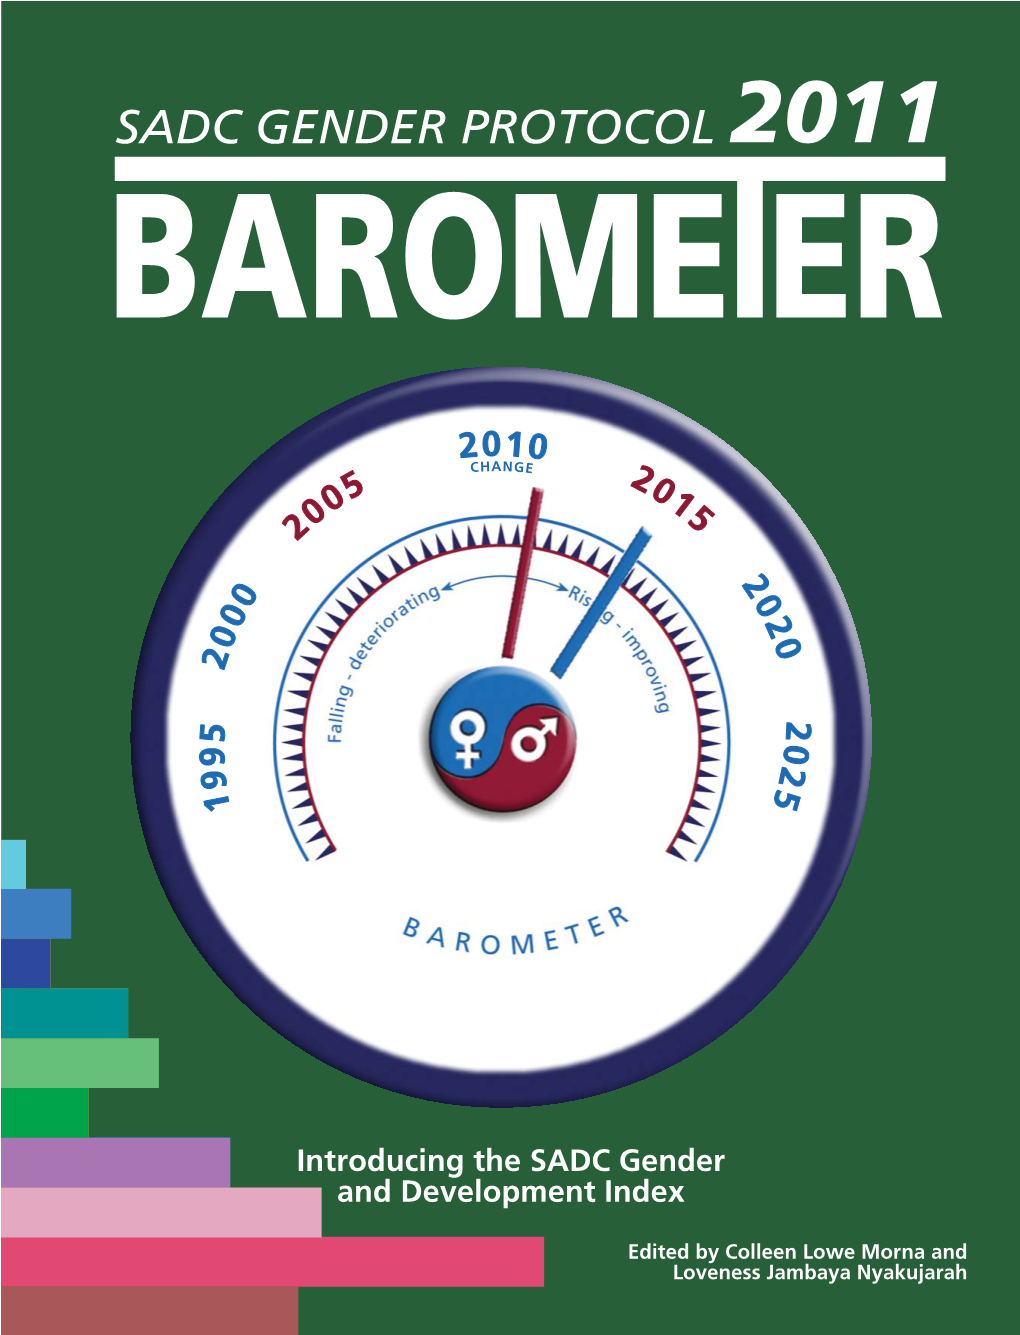 SADC Gender Protocol Barometer at National, Provincial/Regional, Local and Ordinary Citizens' Levels